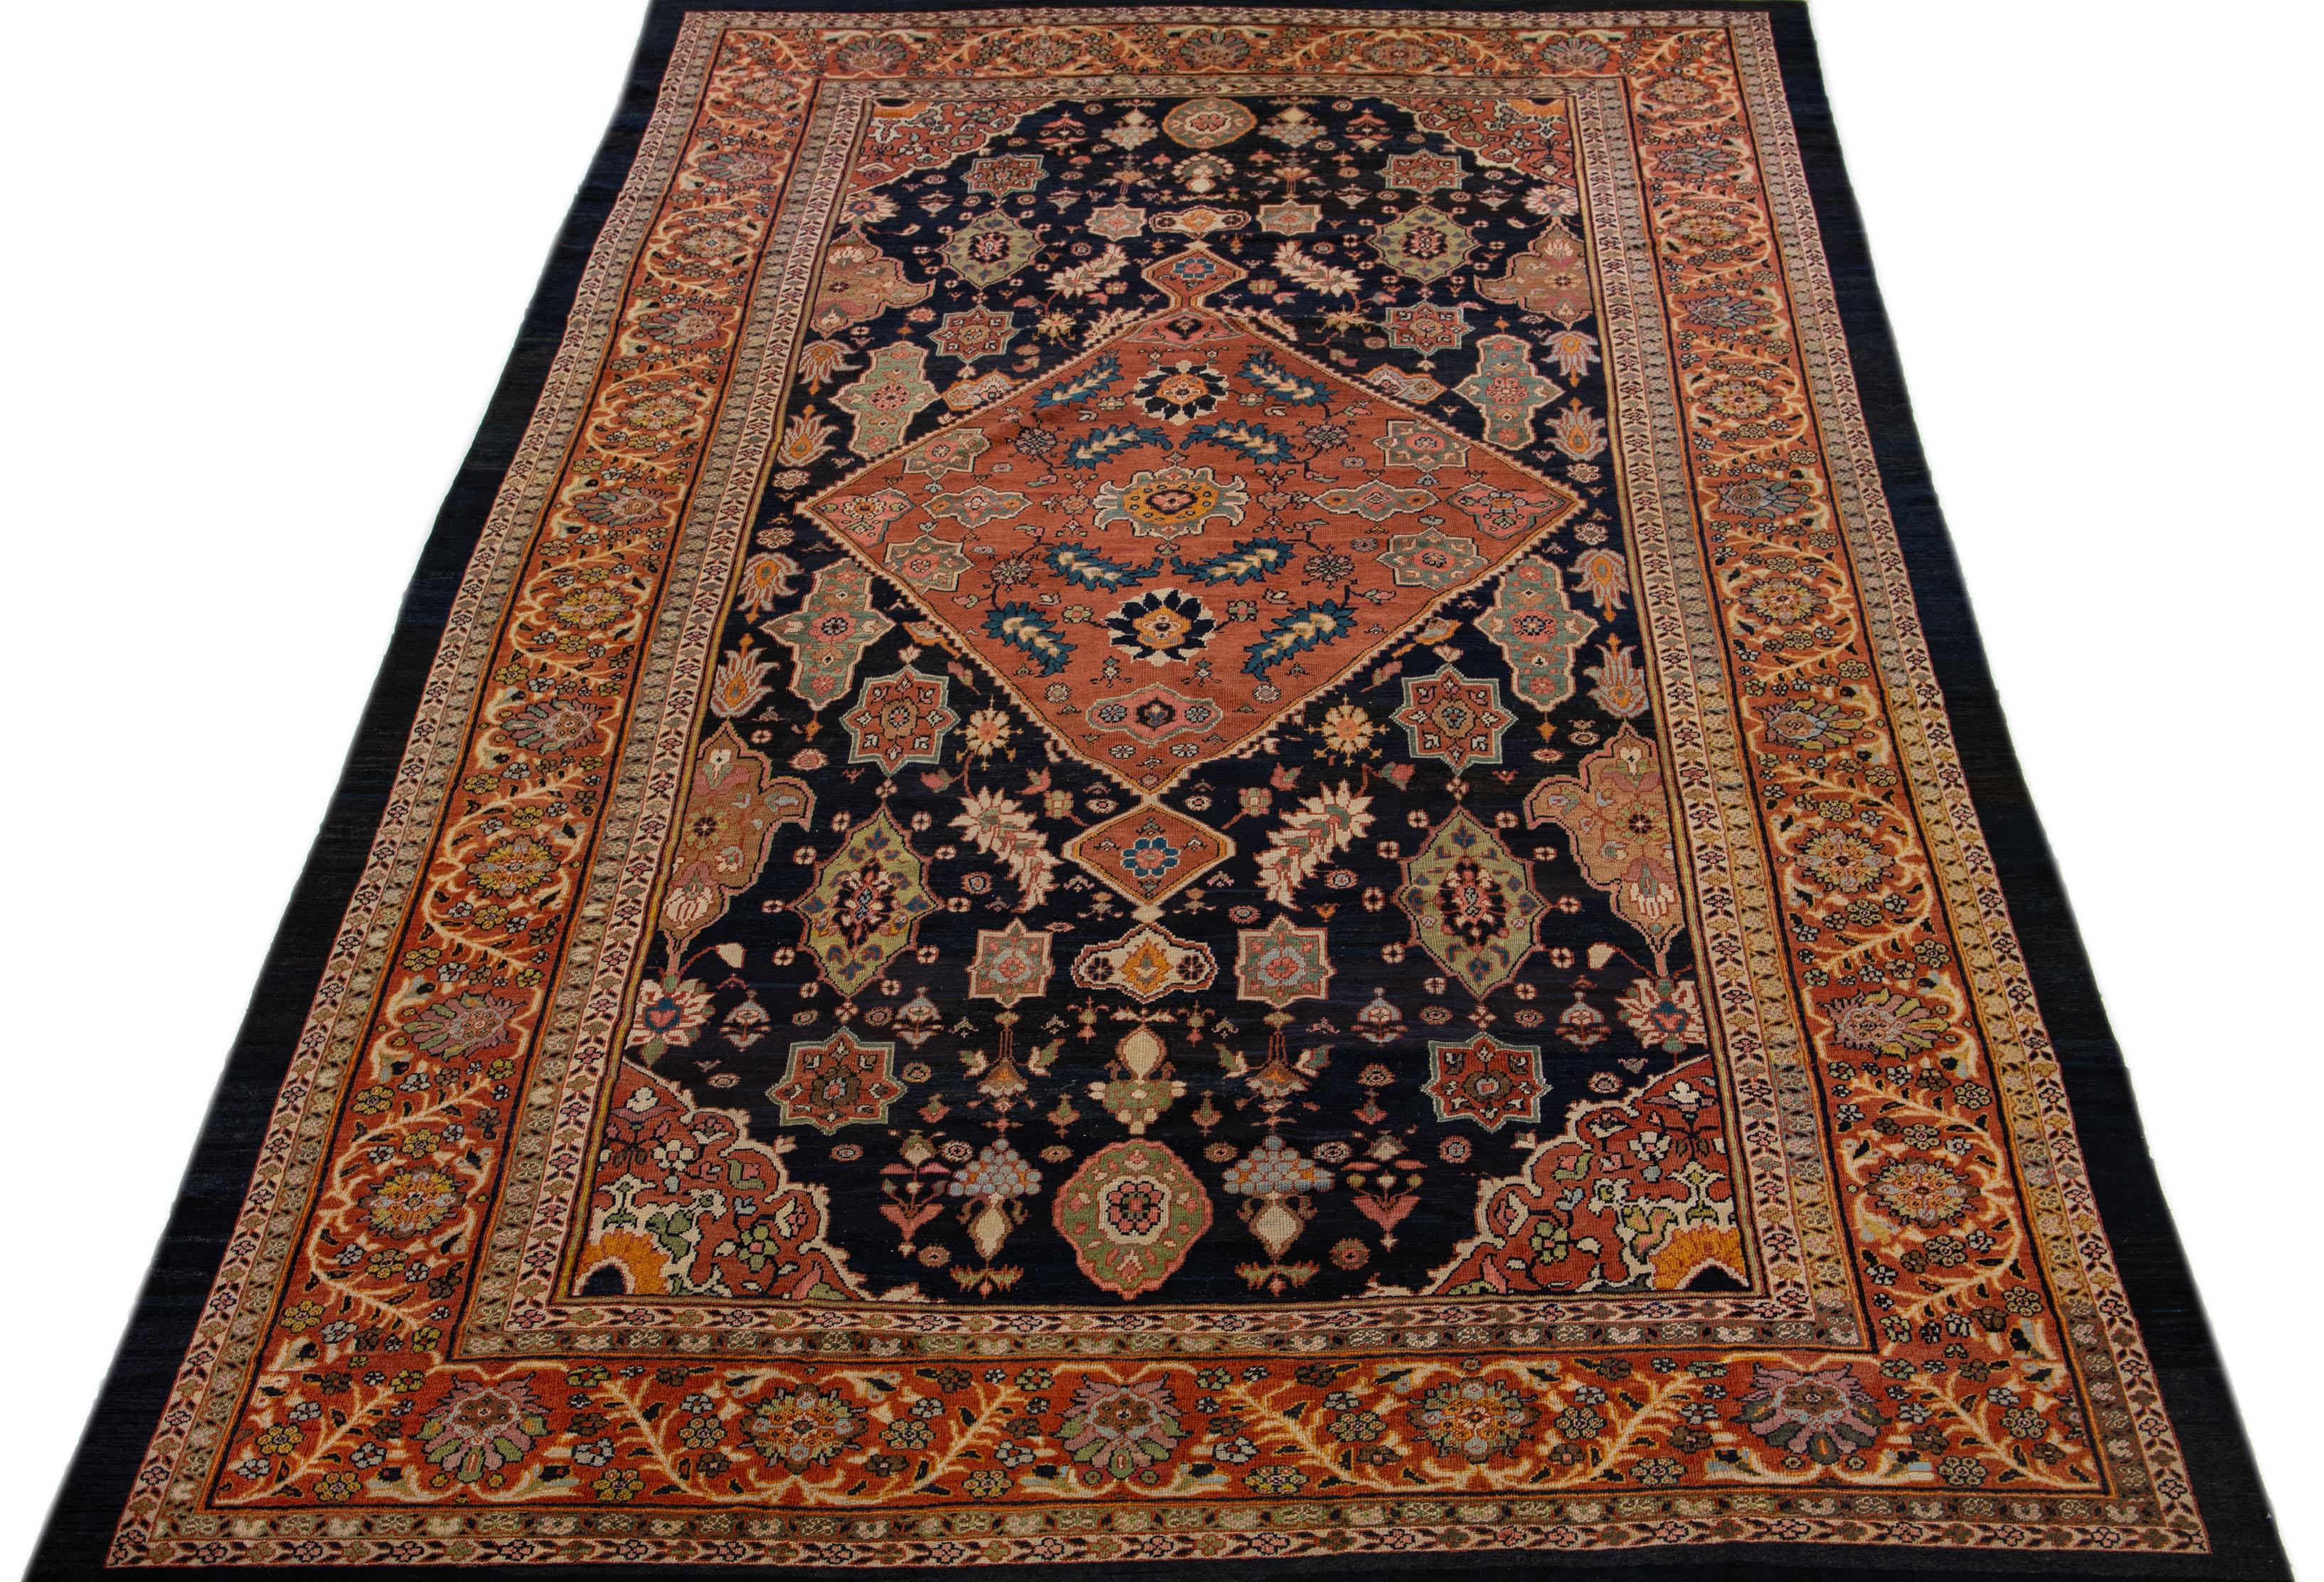 A stunning antique mahal wool rug, exquisitely hand knotted and endowed with a mesmerizing dark blue color field. This Persian masterpiece showcases a terracotta-designed frame that encases an all-over floral pattern, beautifully accentuated with